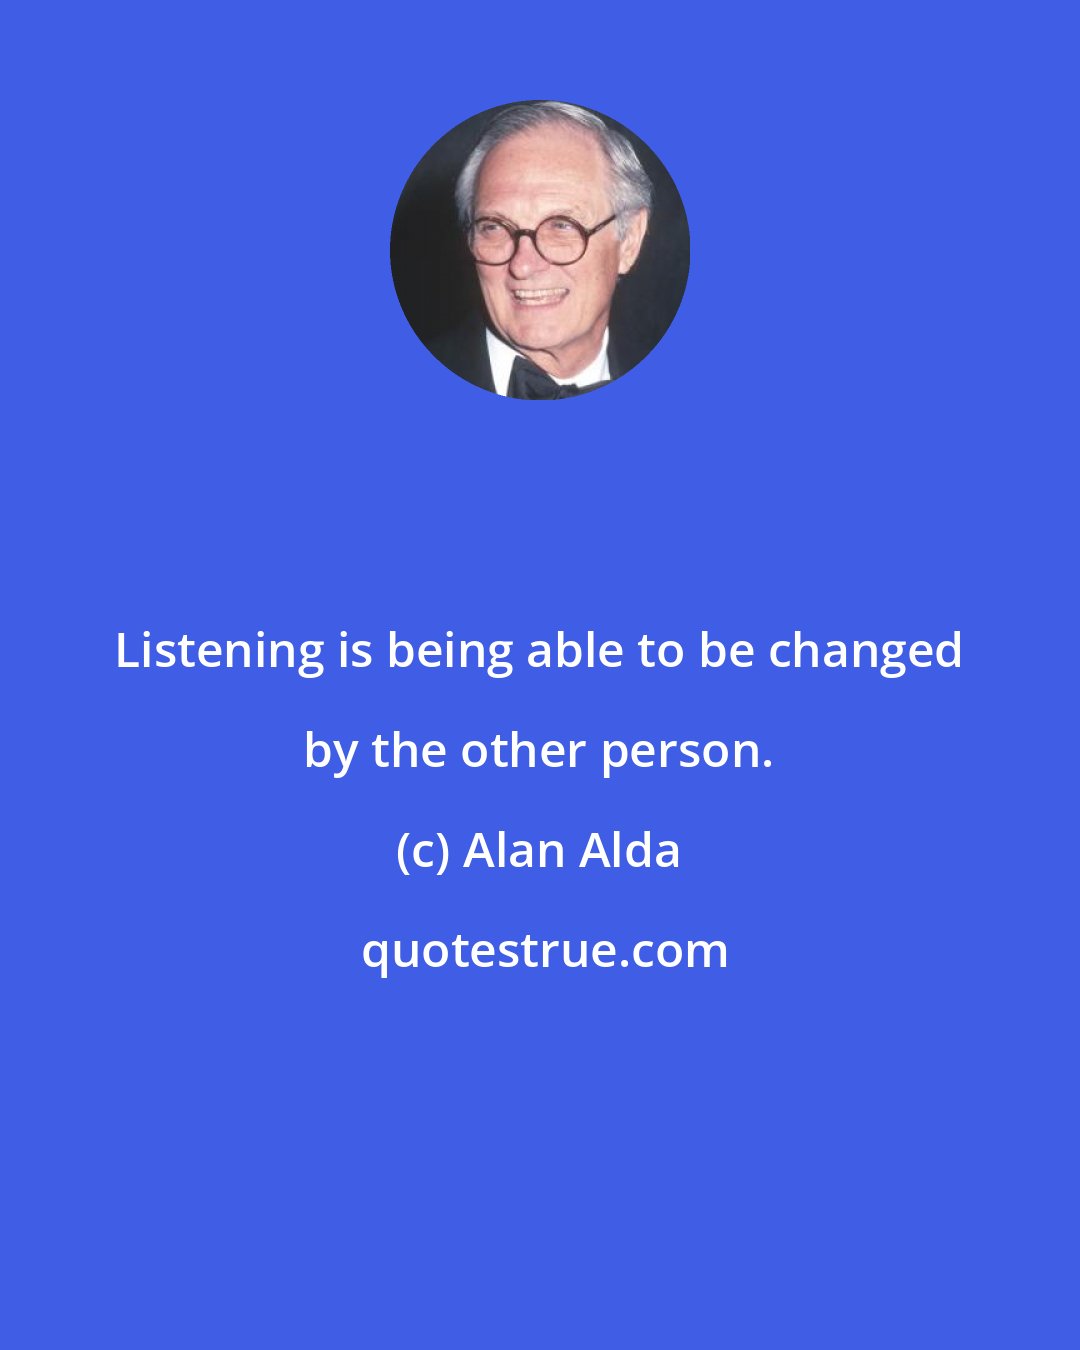 Alan Alda: Listening is being able to be changed by the other person.